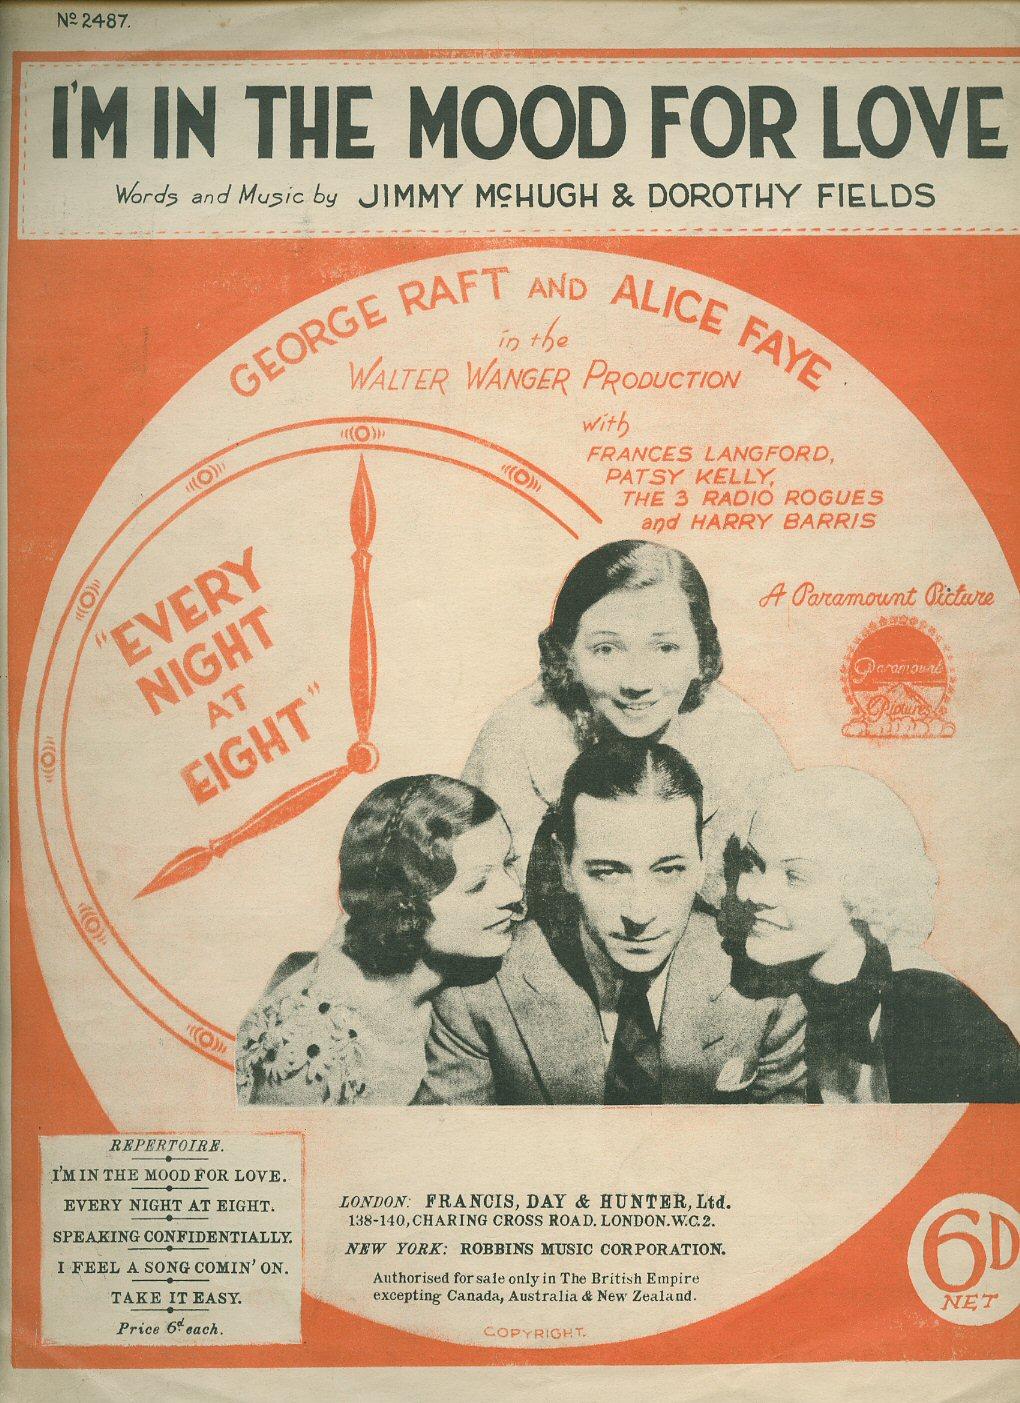 I M In The Mood For Love Every Night At Eight Vintage Piano Sheet Music By Jimmy Mchugh And Dorothy Fields Additional Lyrics By Charles Wilmott George Raft And Alice Faye 1935 Sheet Nbsp Music